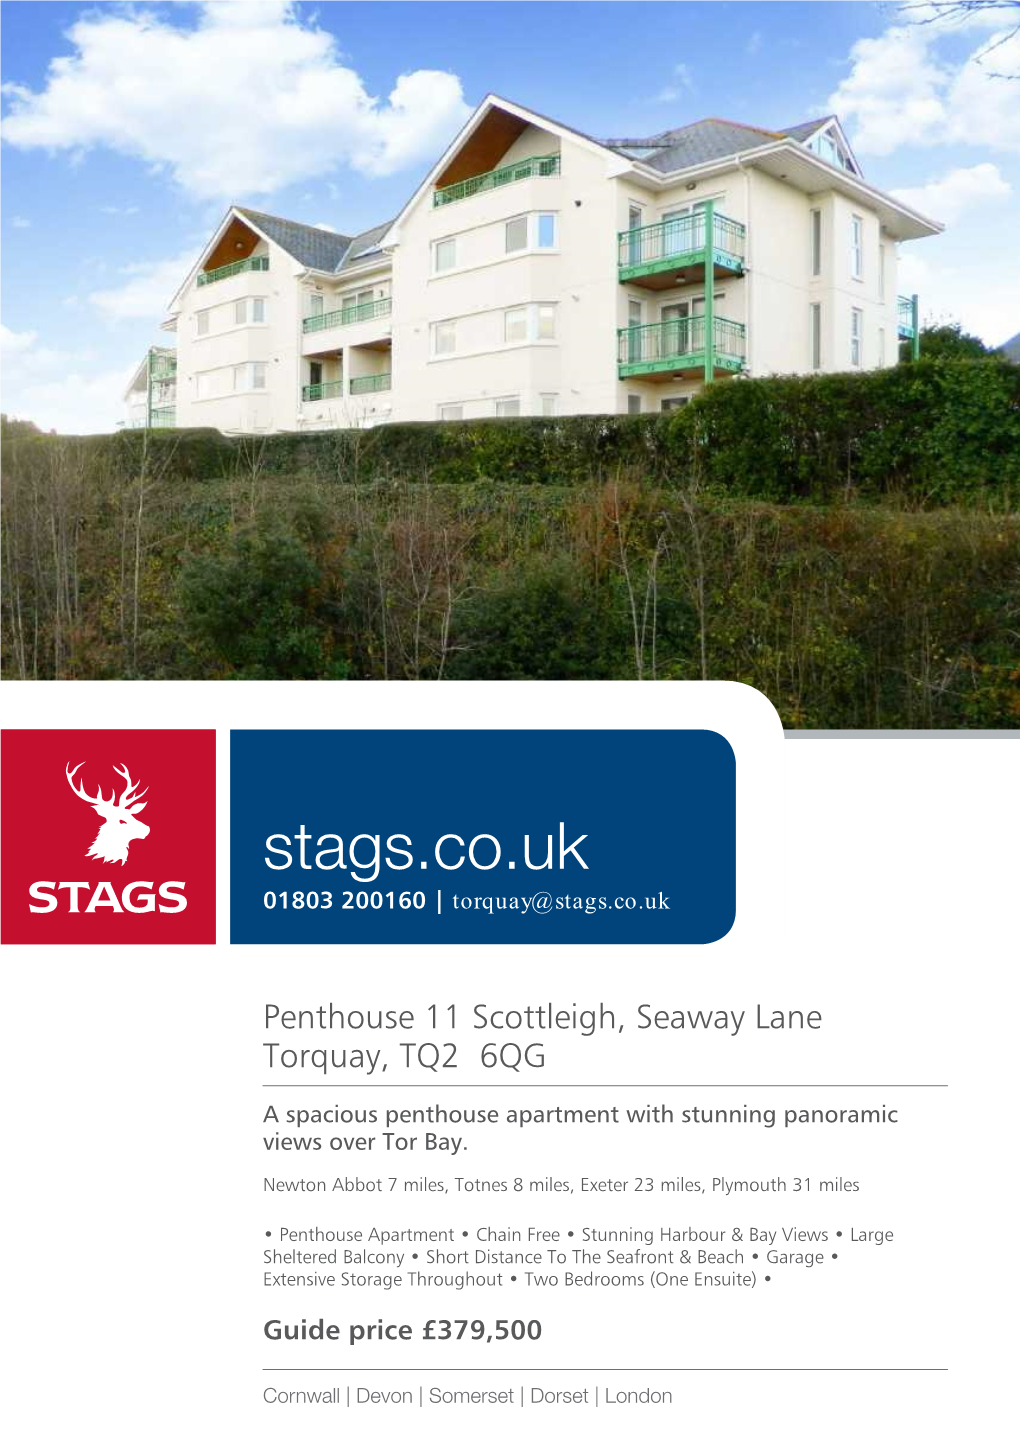 Stags.Co.Uk 01803 200160 | Torquay@Stags.Co.Uk